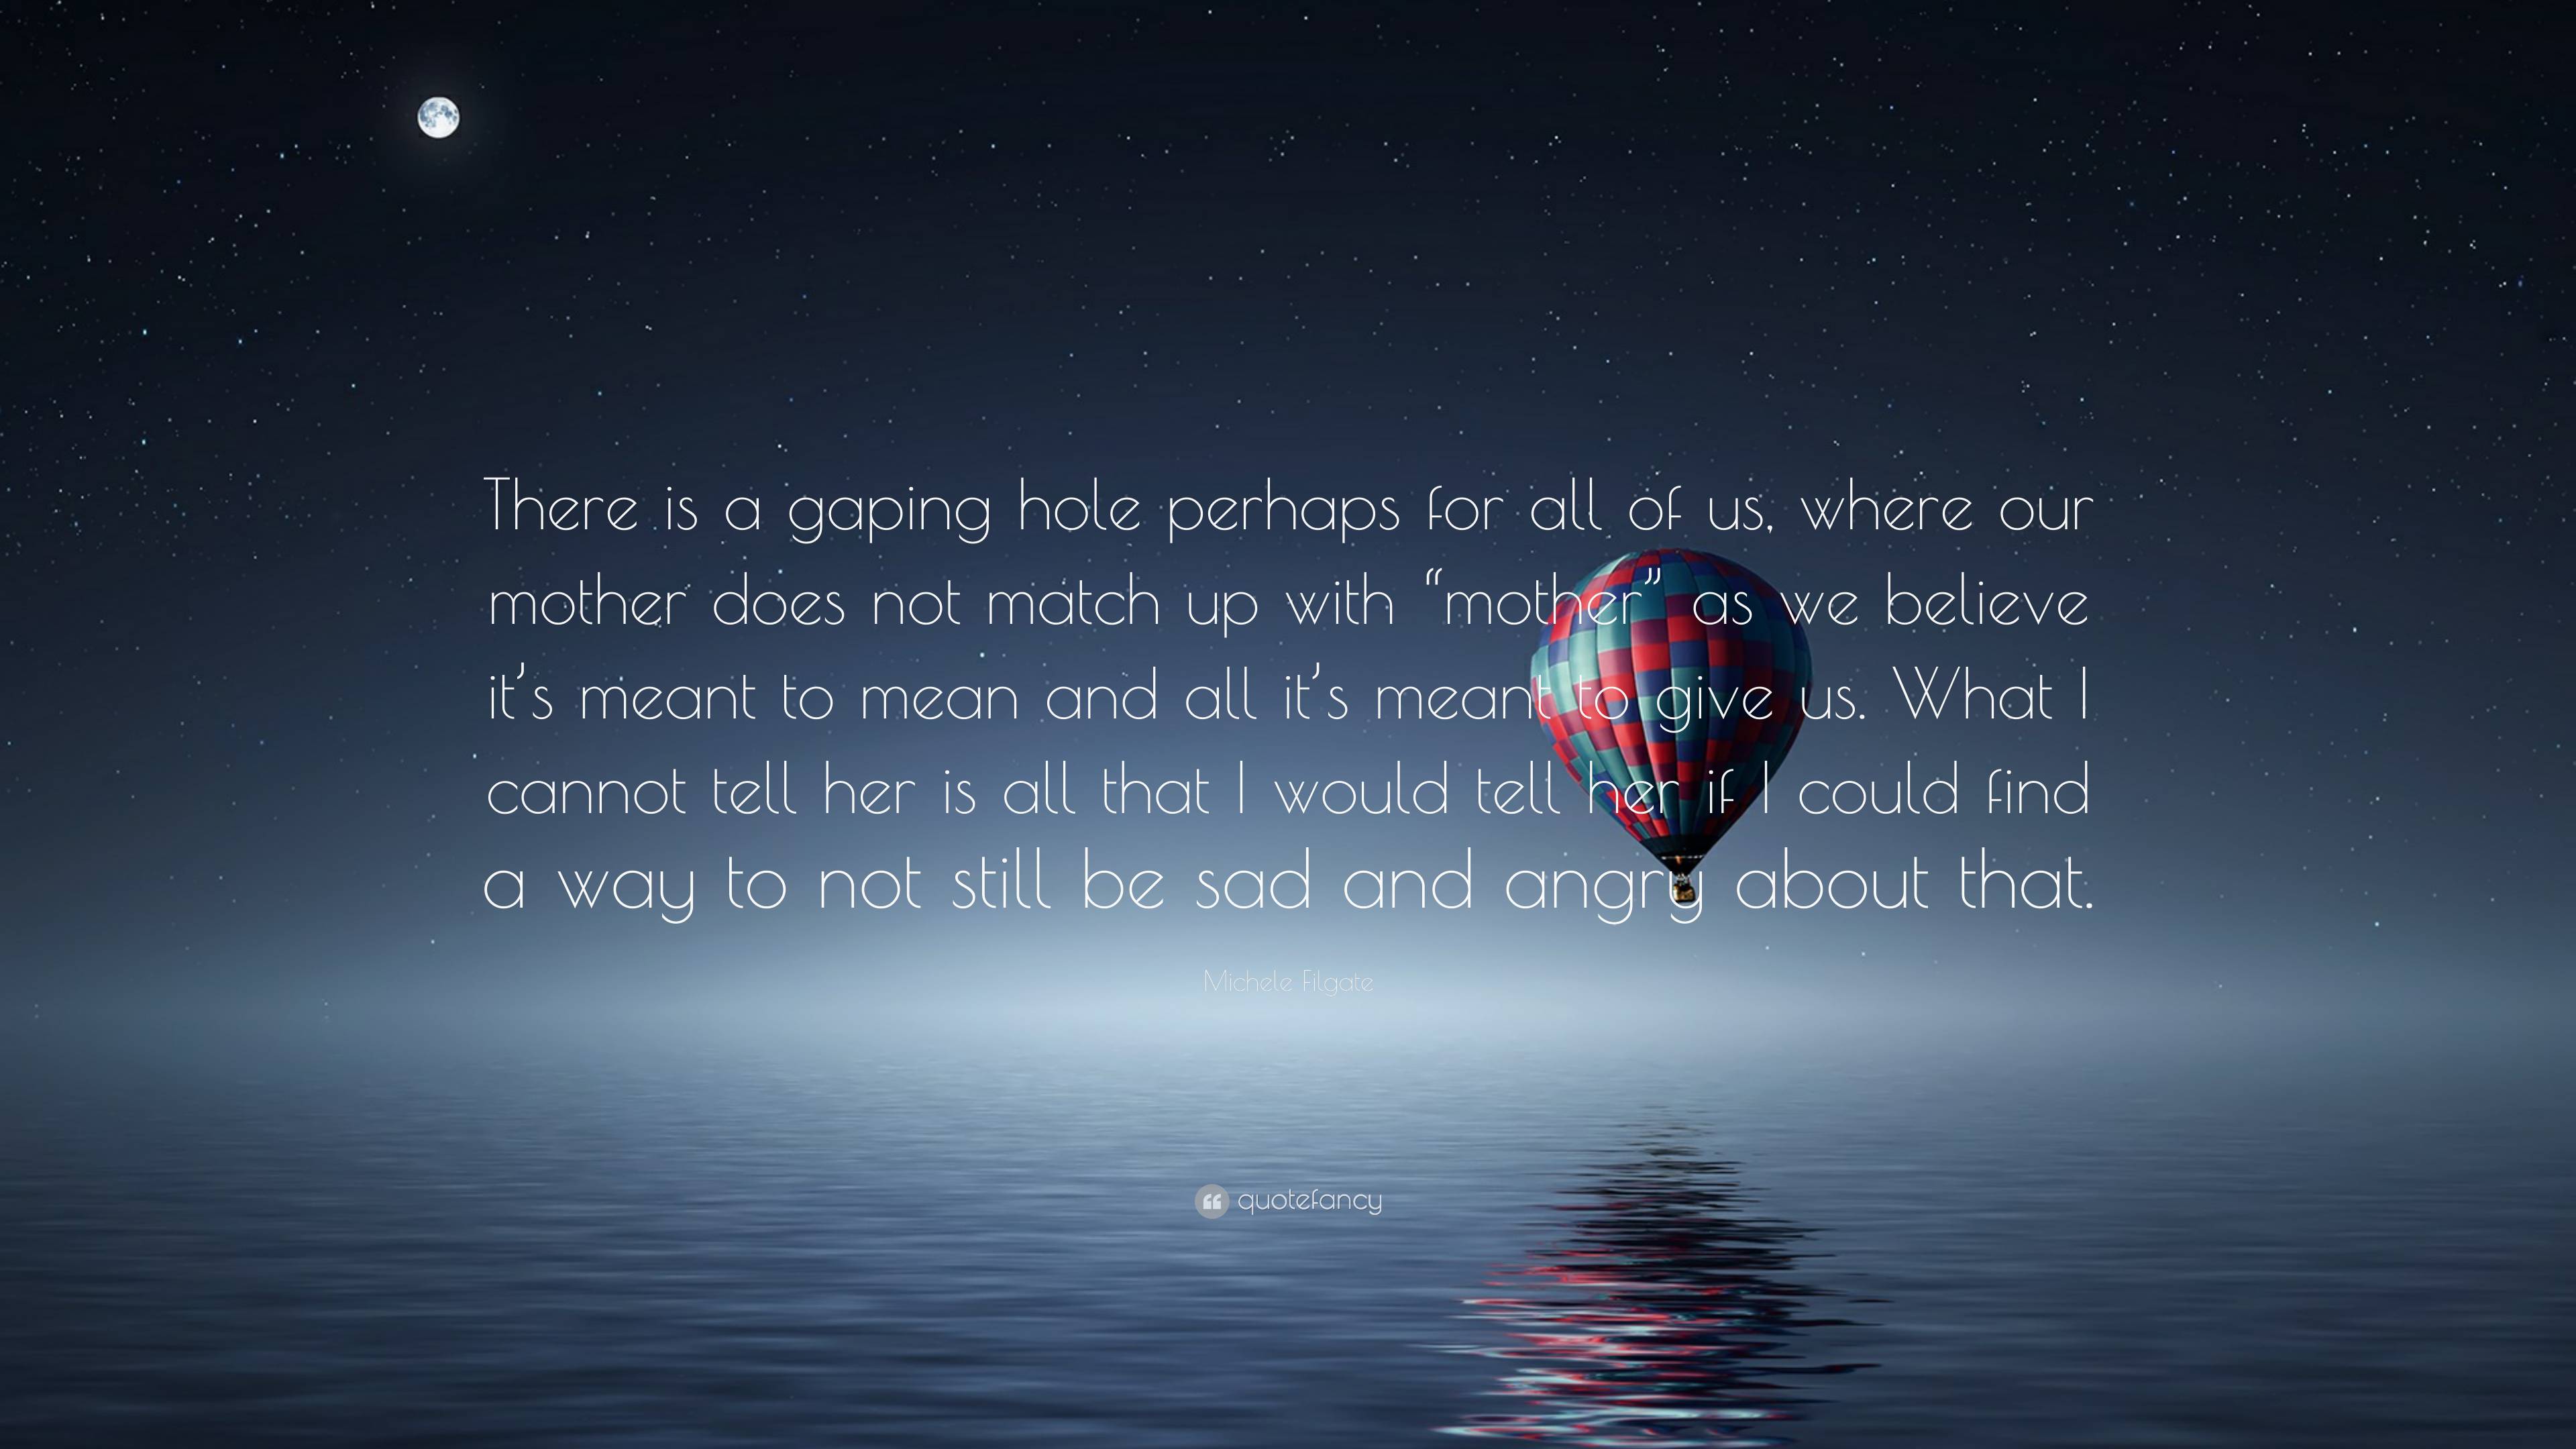 https://quotefancy.com/media/wallpaper/3840x2160/7198411-Michele-Filgate-Quote-There-is-a-gaping-hole-perhaps-for-all-of-us.jpg